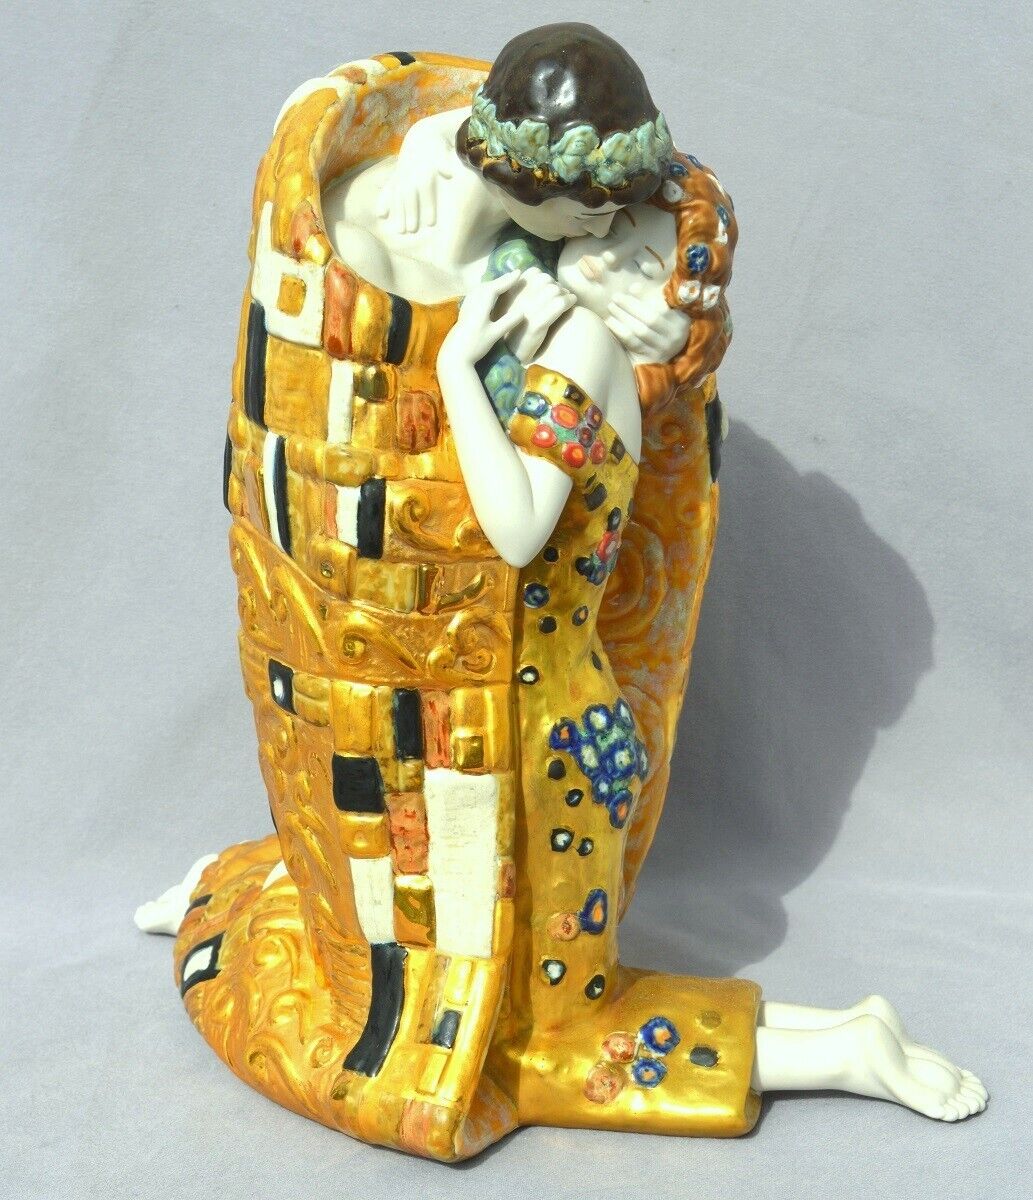 LLADRO 8667 “THE KISS” 2012 Limited Edition - Based on Painting by Gustav Klimt